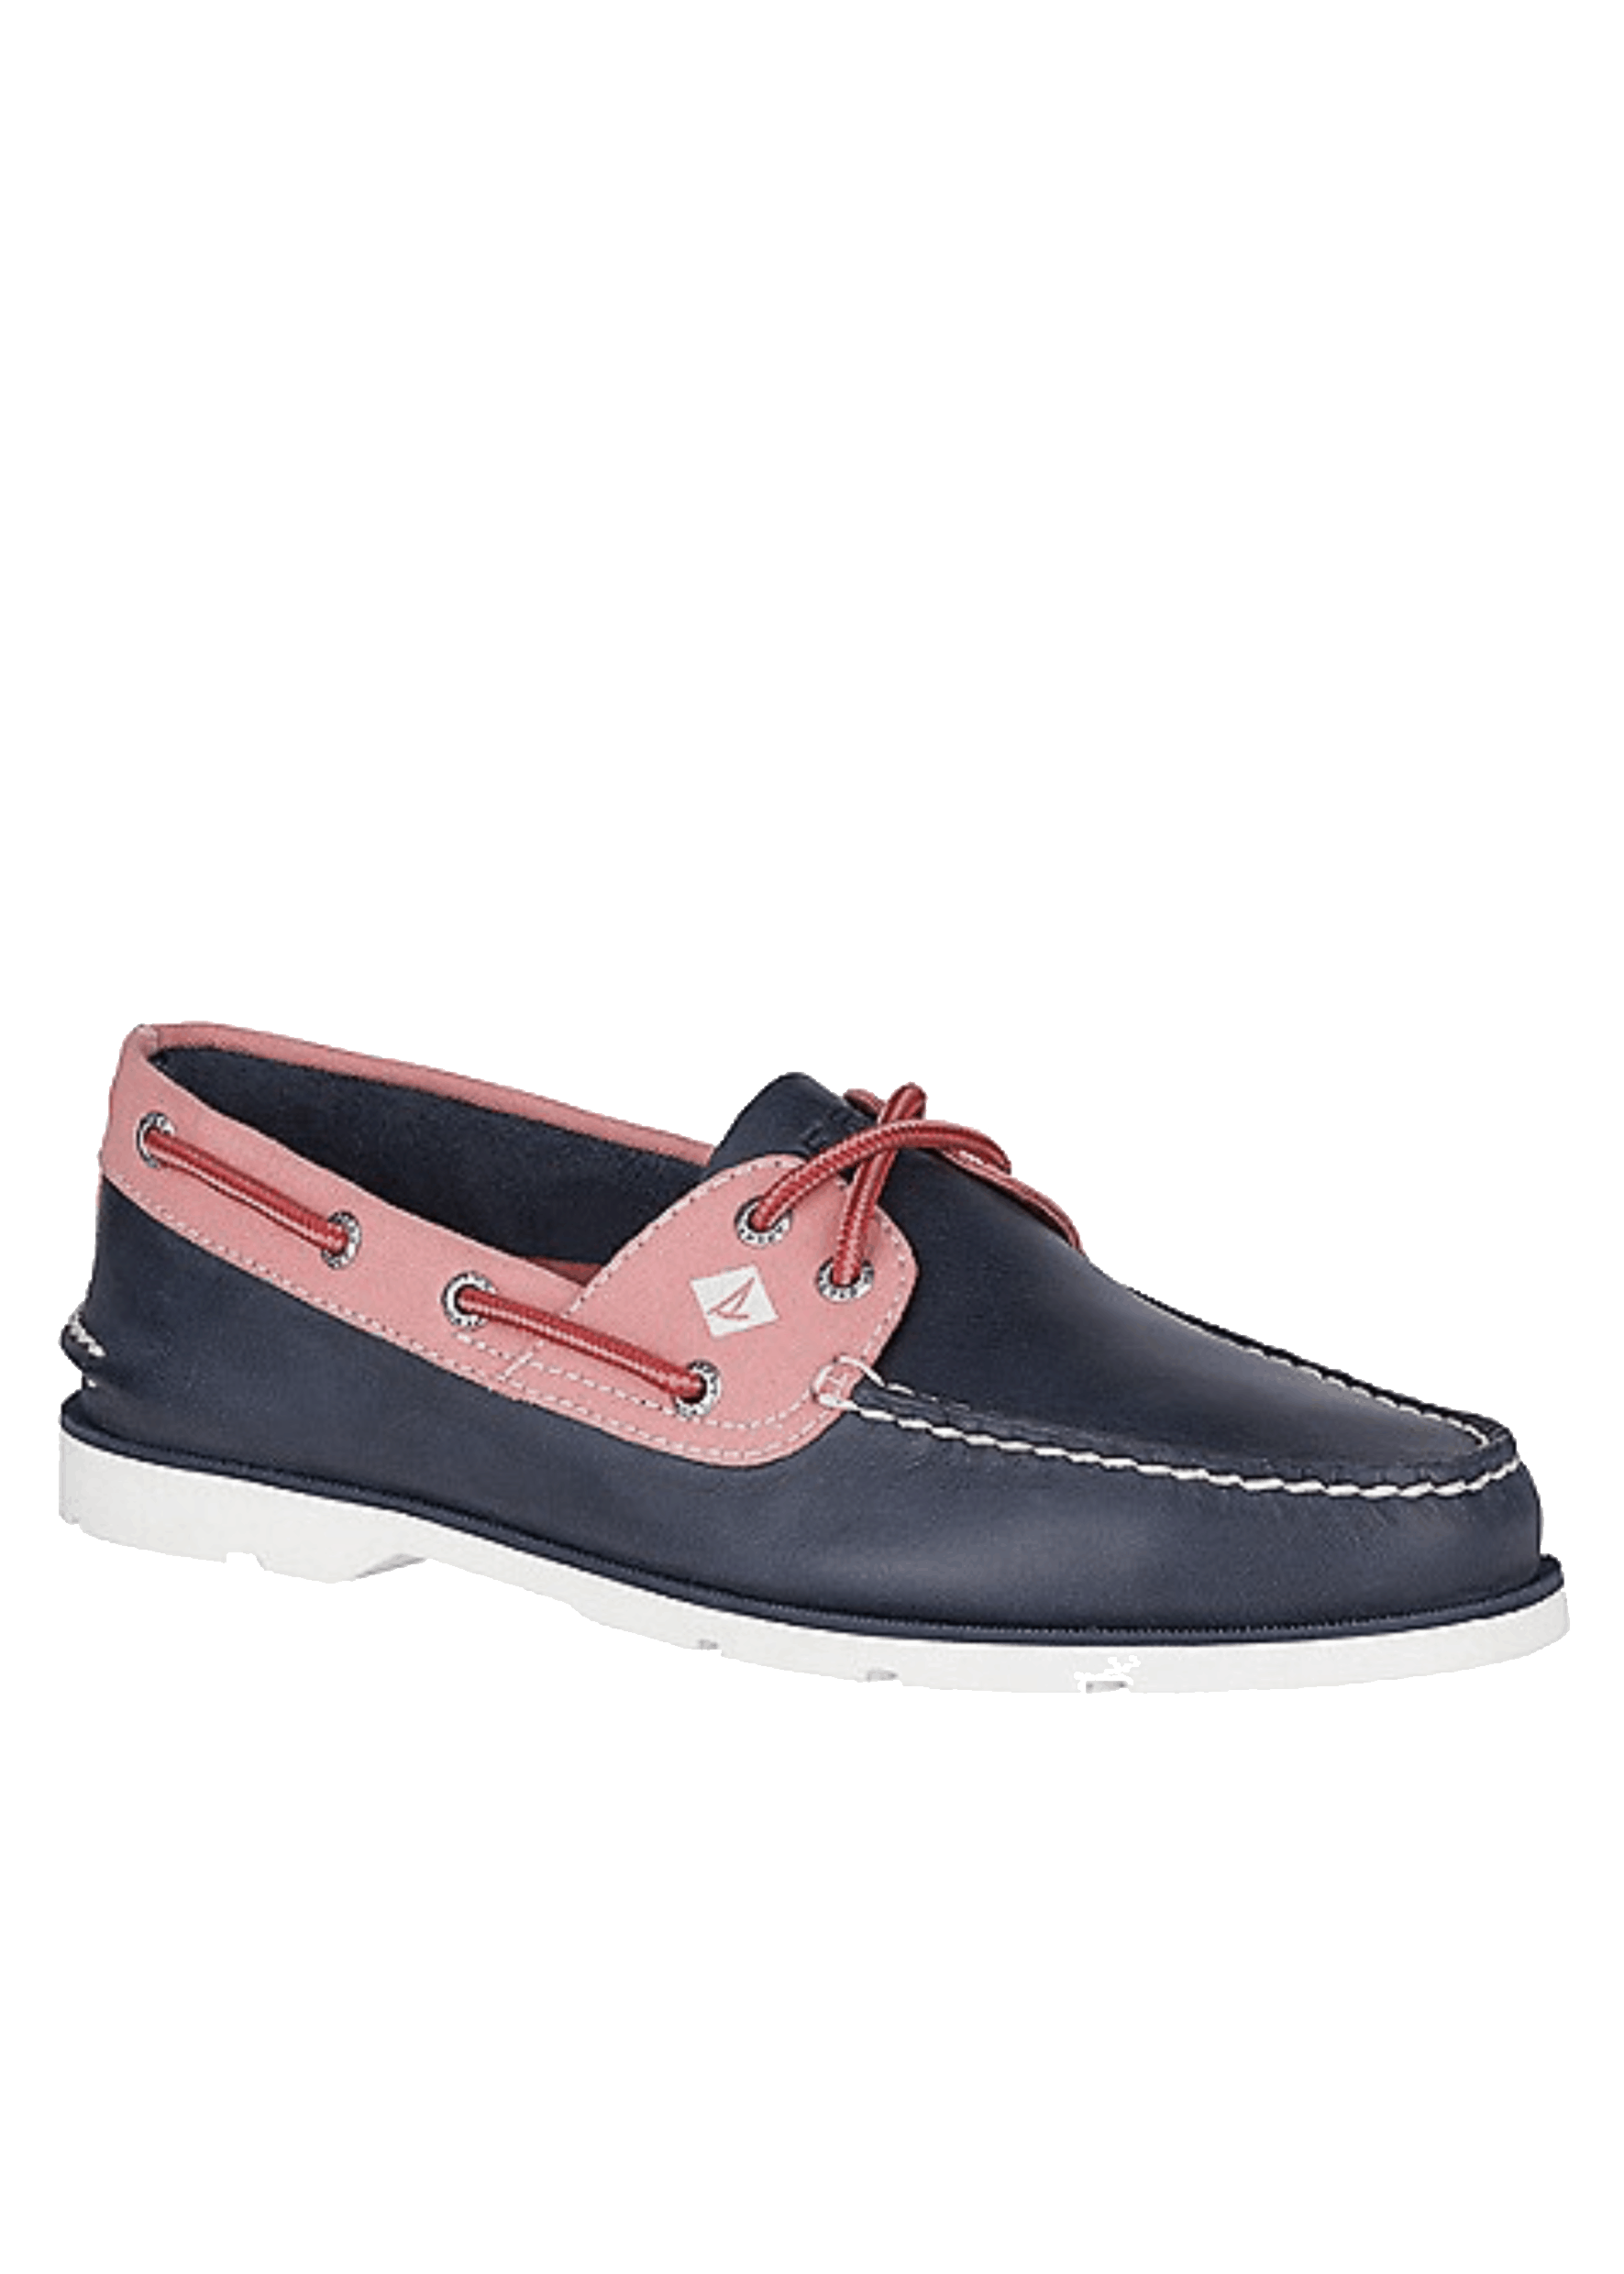 Sperry Pink Navy Leather Boat Shoes - Selection Coste